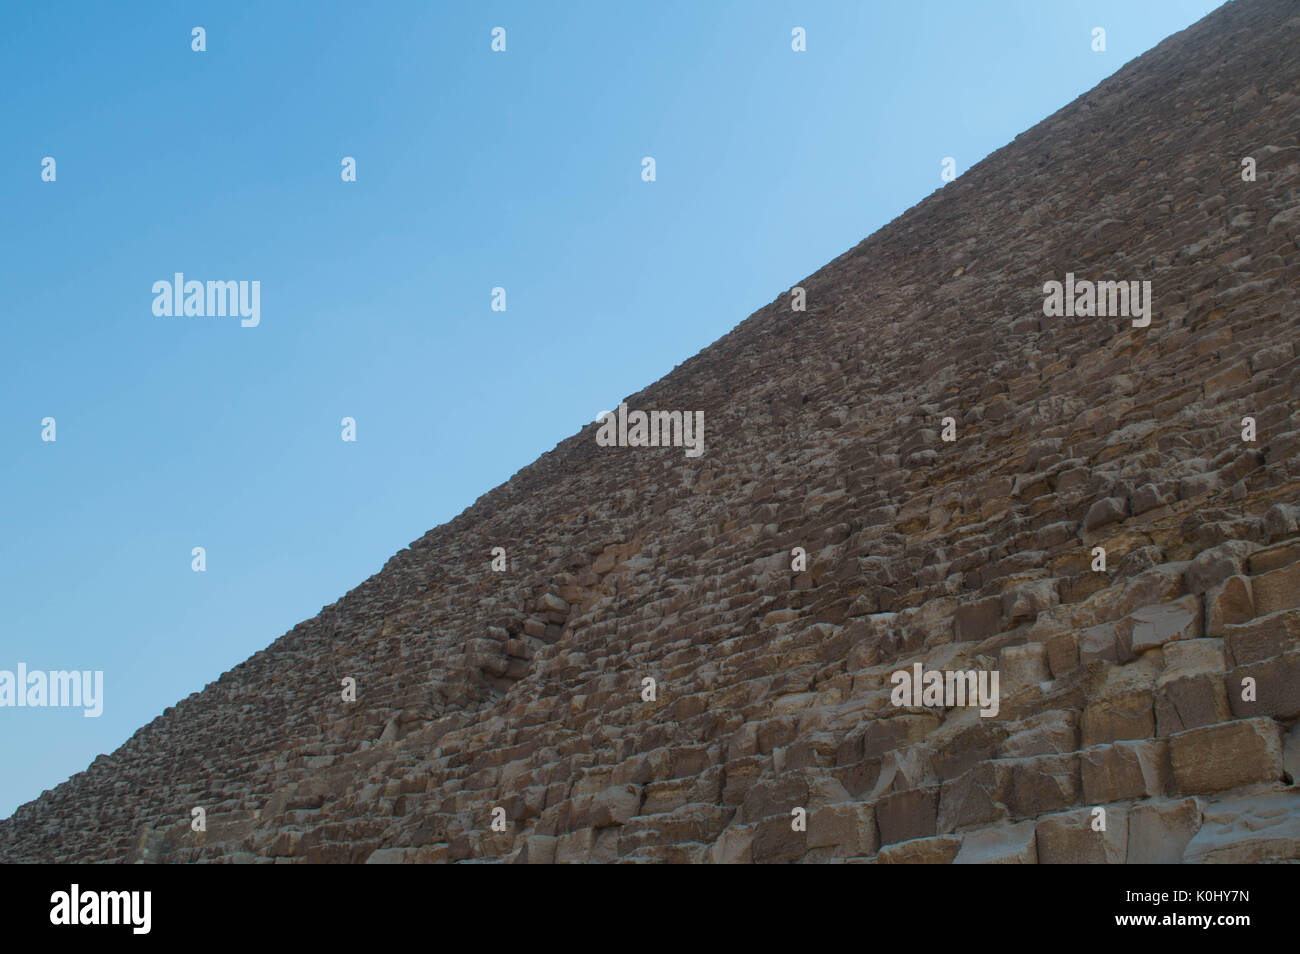 One side of the Great Pyramid of Giza travelling across the sky. Stock Photo